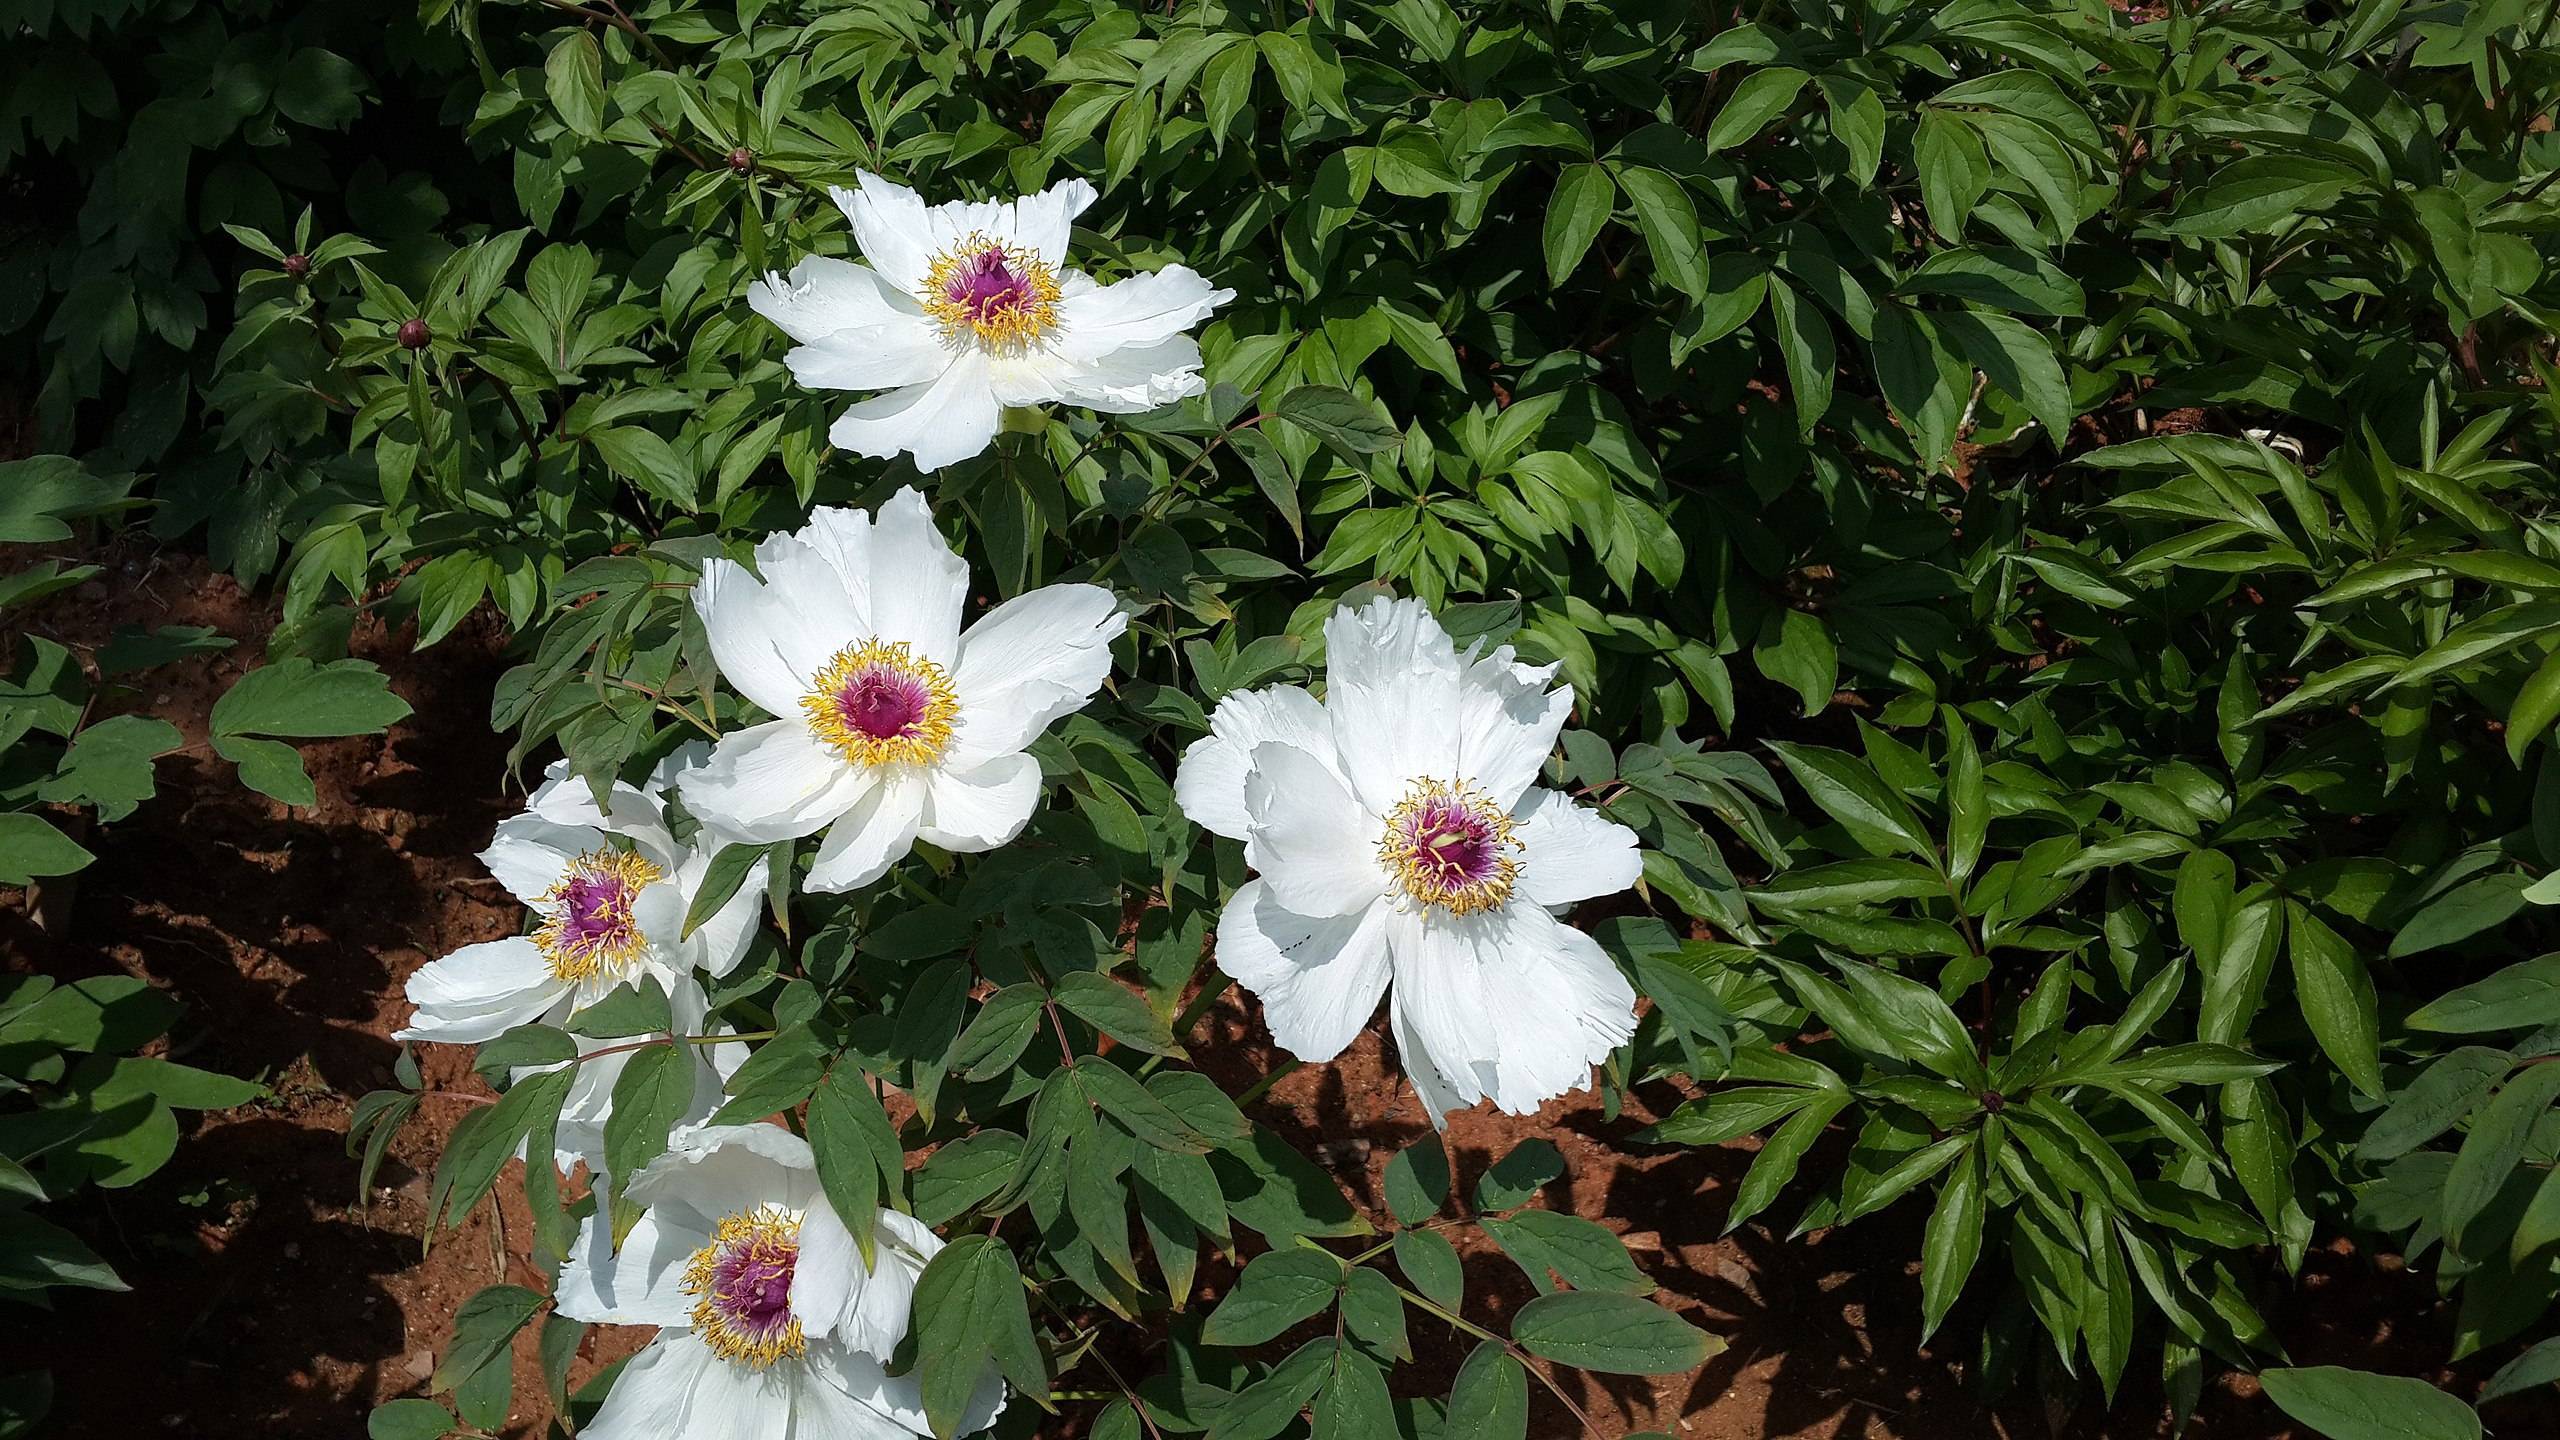 white flowers with purple center, yellow stamens, dark-green leaves and brown stems